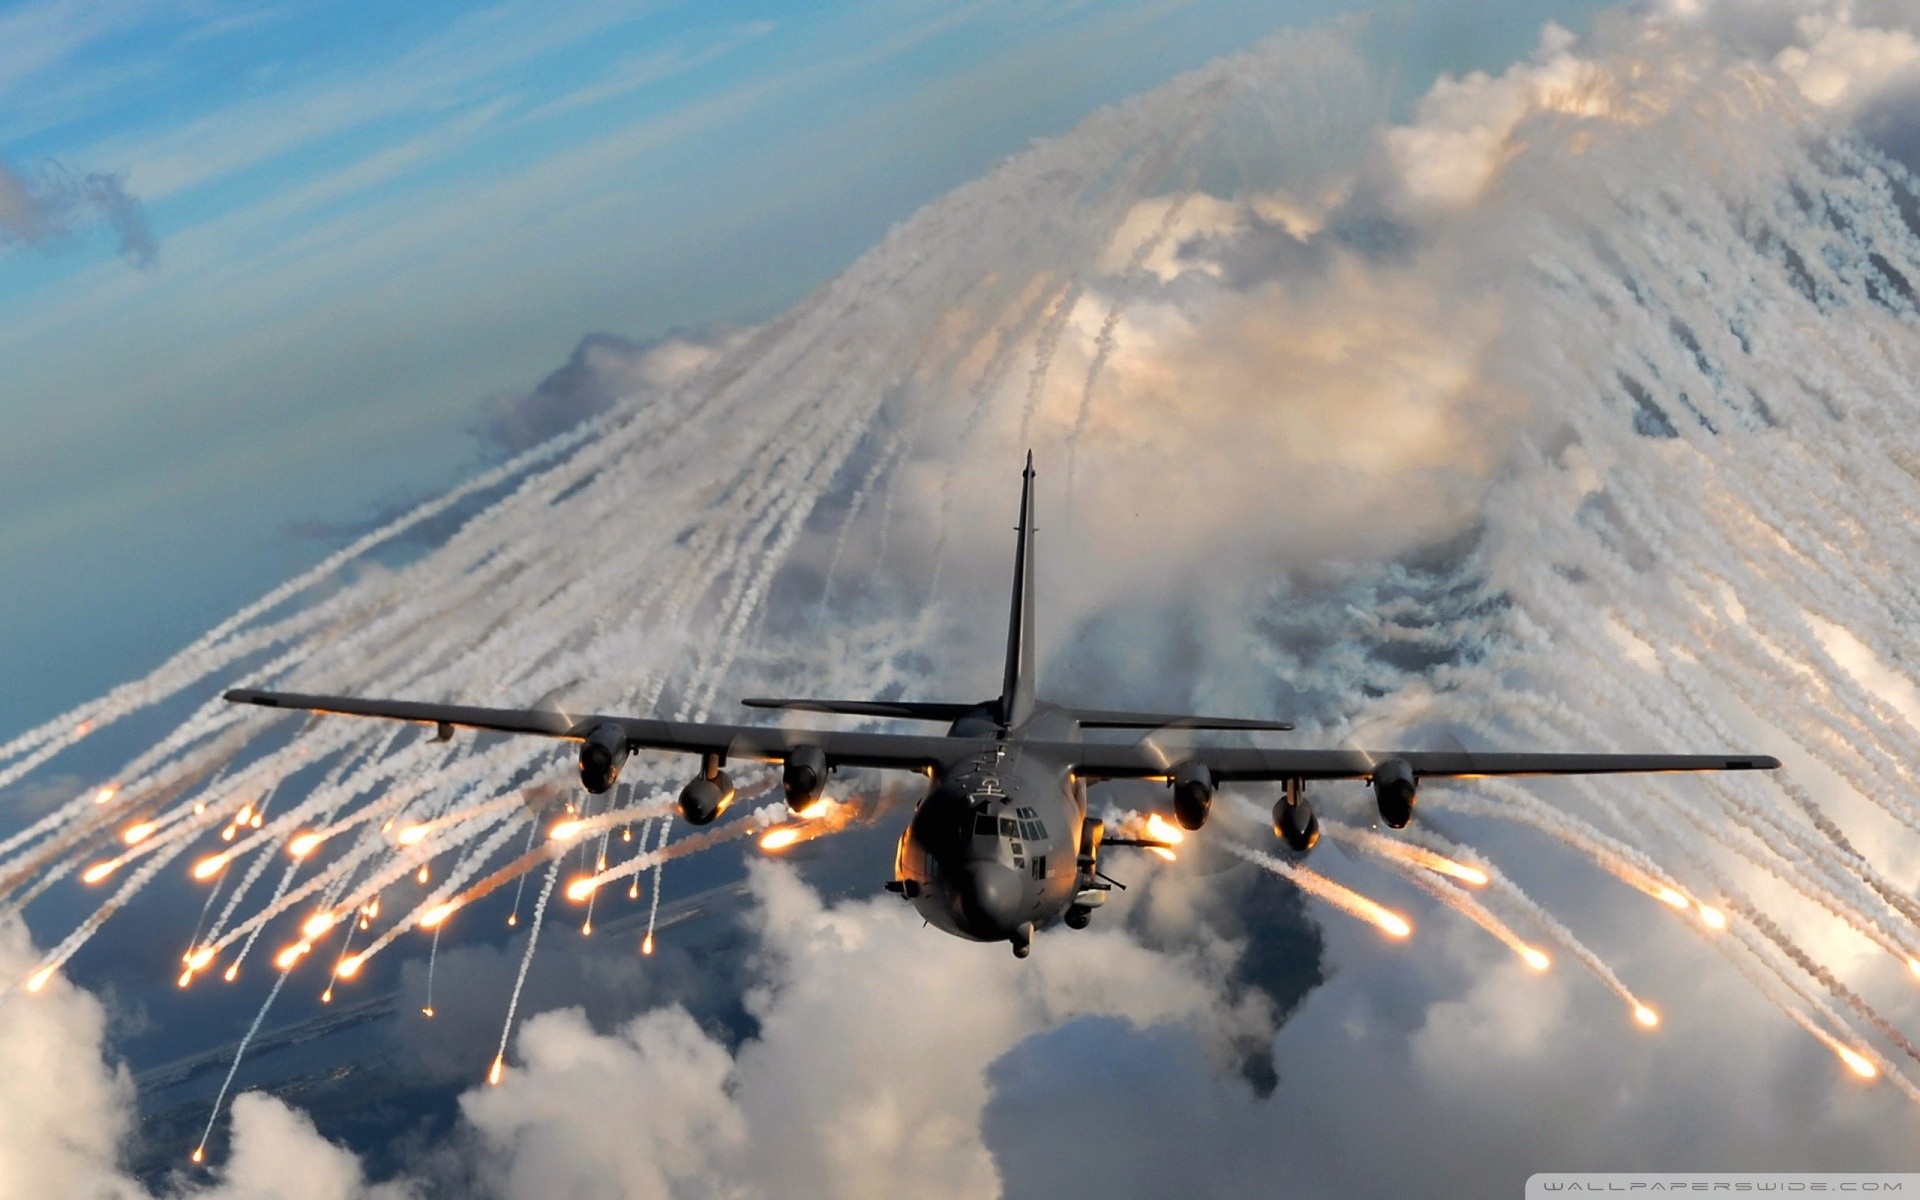 General 1920x1200 military aircraft vehicle military aircraft Lockheed AC-130 military vehicle flares US Air Force watermarked American aircraft Lockheed